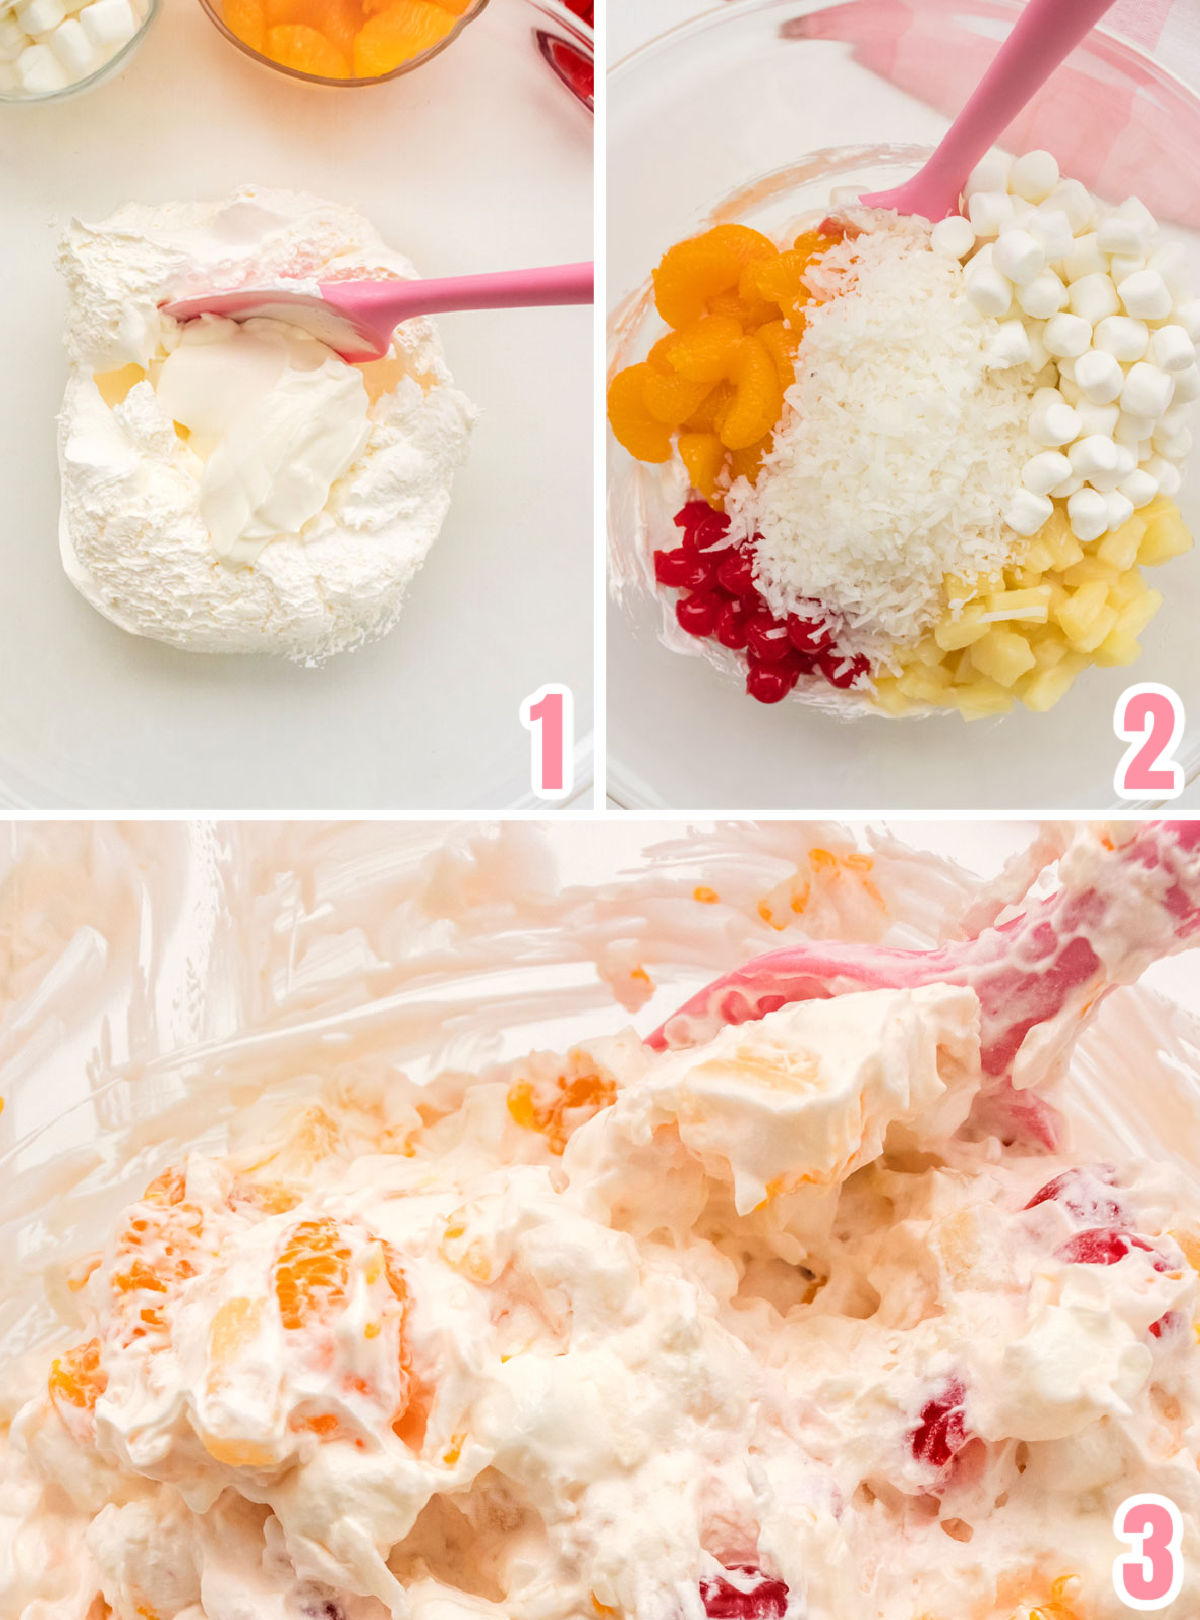 Collage image showing the steps for assembling the Ambrosia Salad.